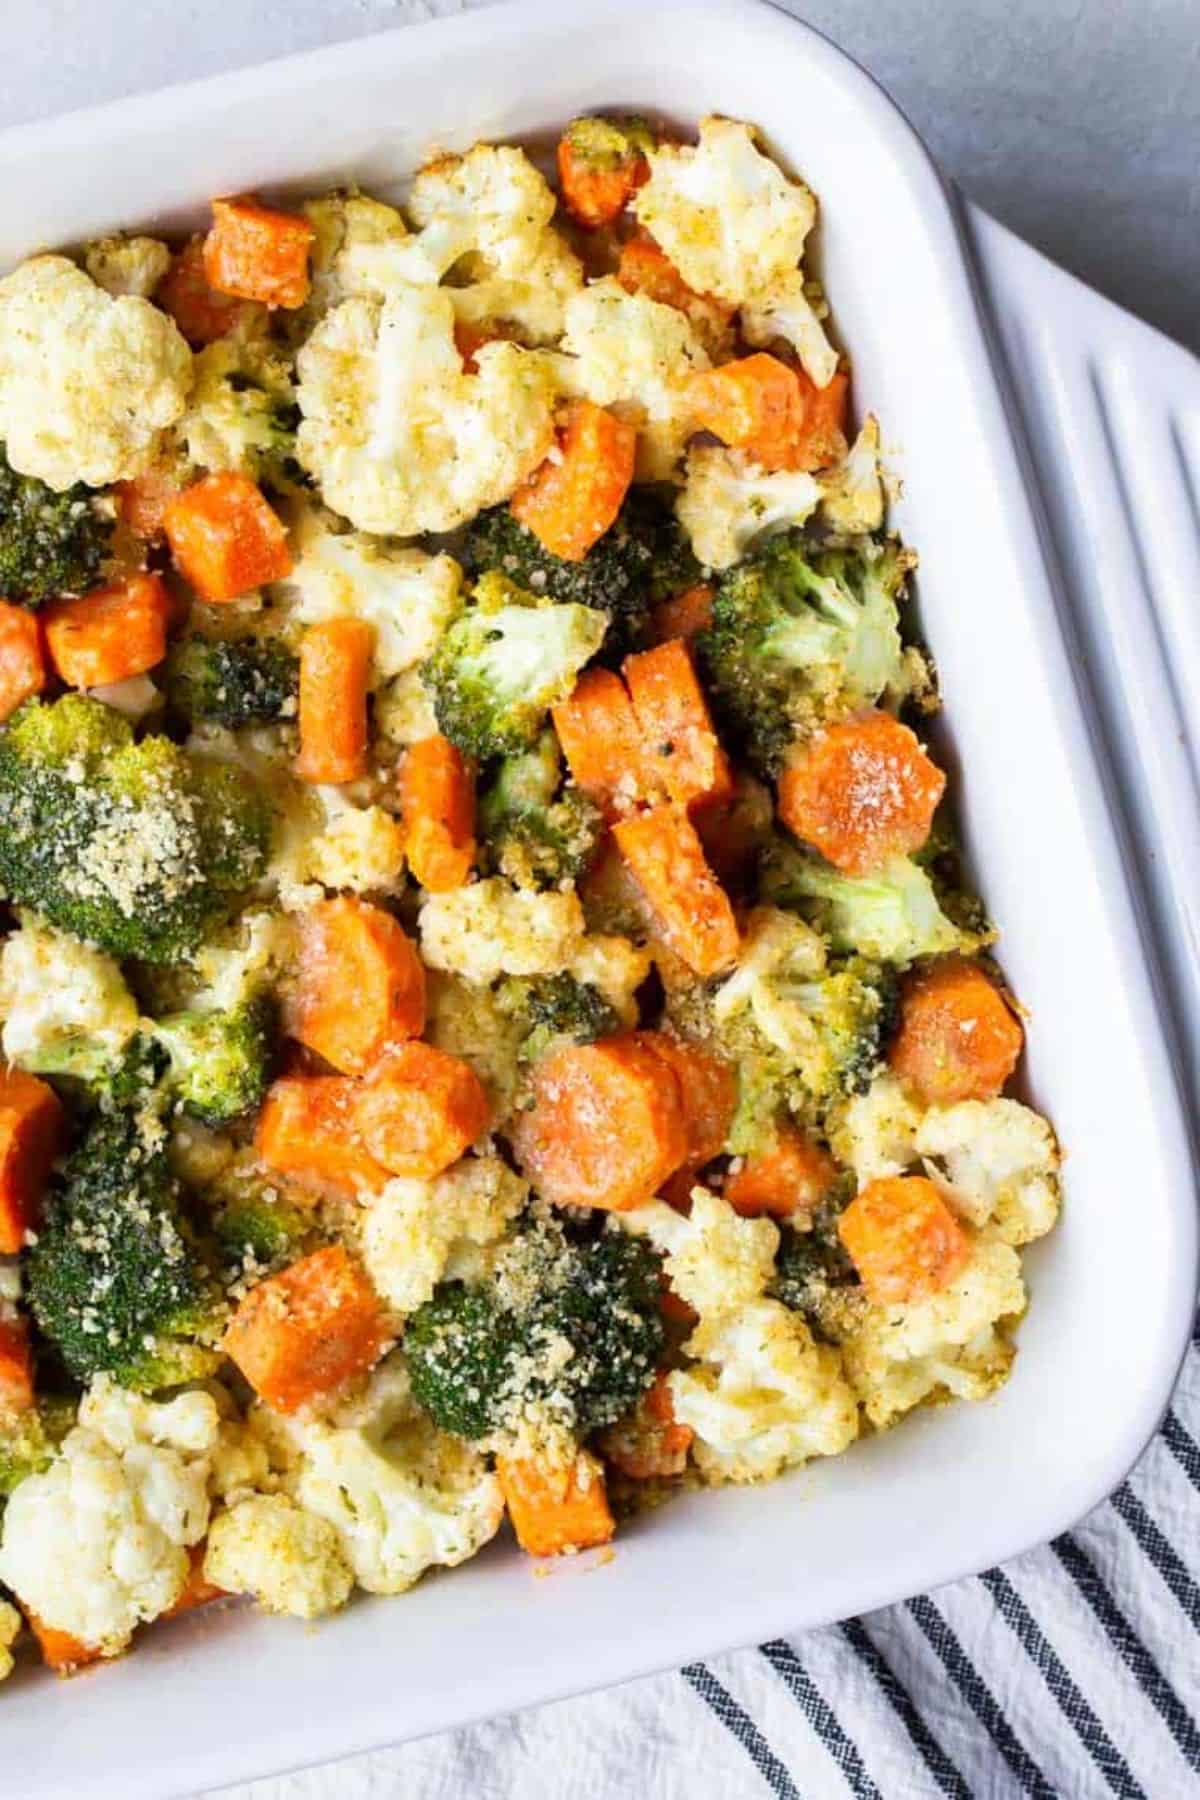 California Blend Vegetables With Parmesan Bread Crumbs in a white bowl.